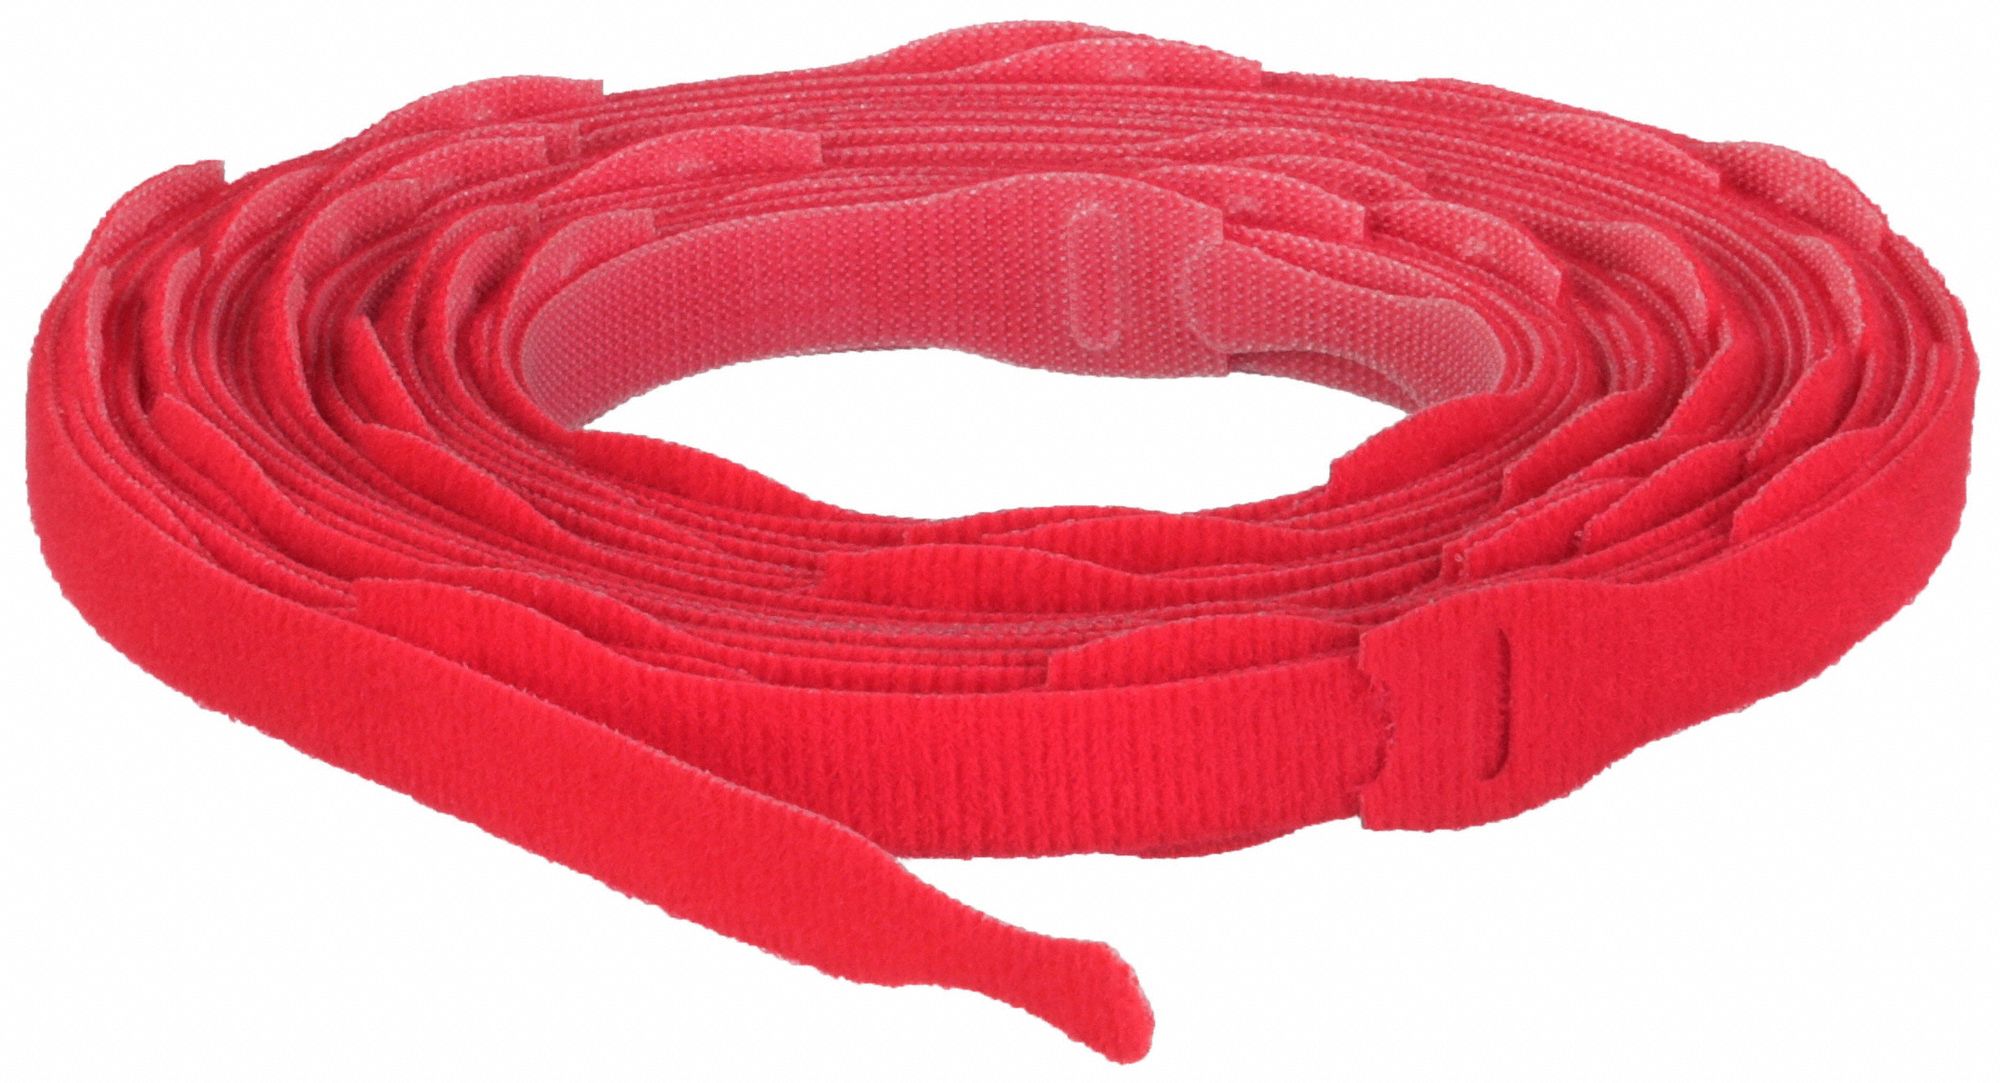 VELCRO BRAND Perforated Back to Back Strap: 8 in Lg, 2.00 in, 0.75 in ...